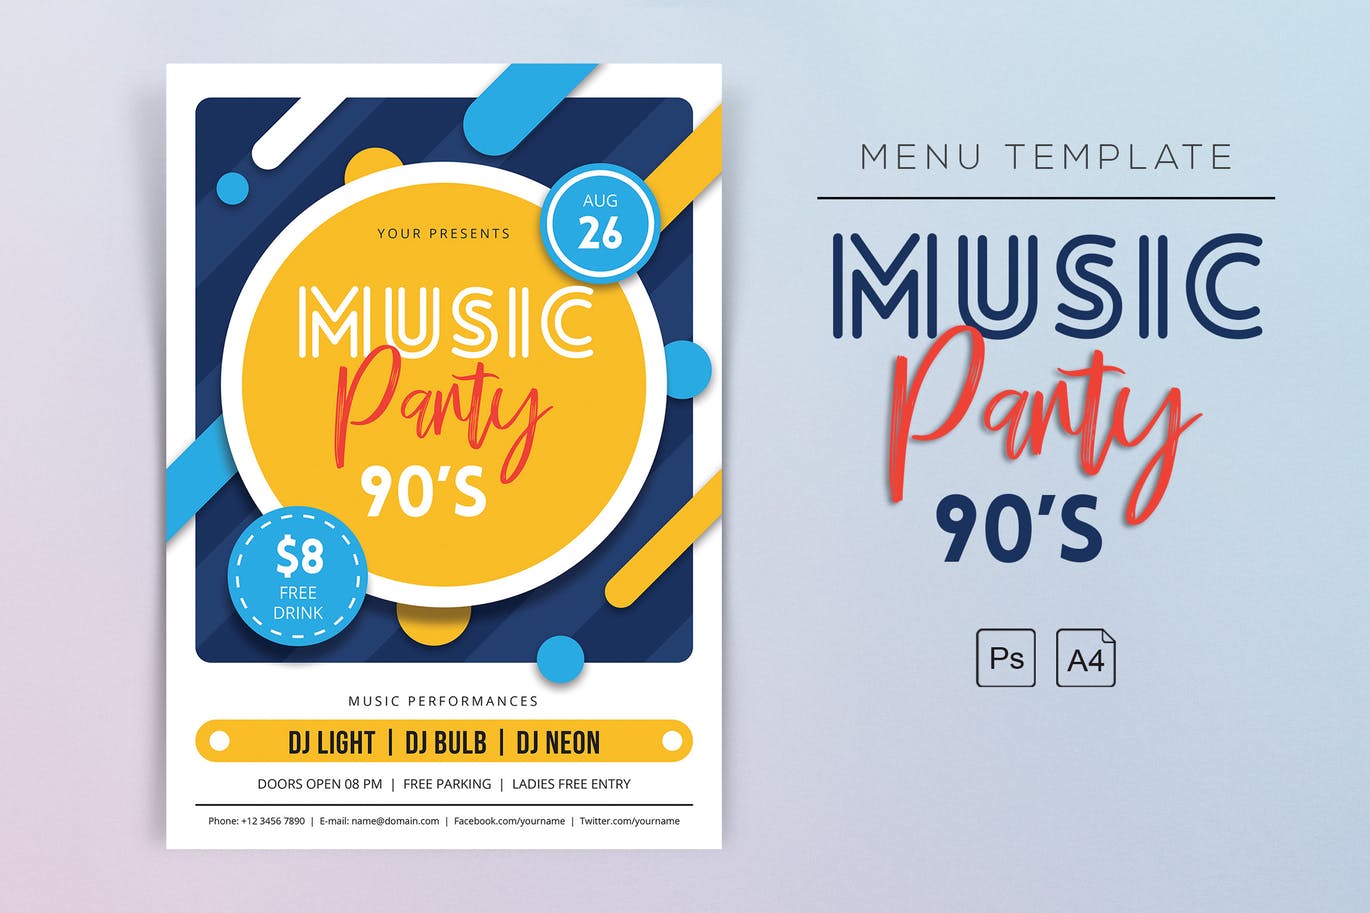 A 90s music party flyer template